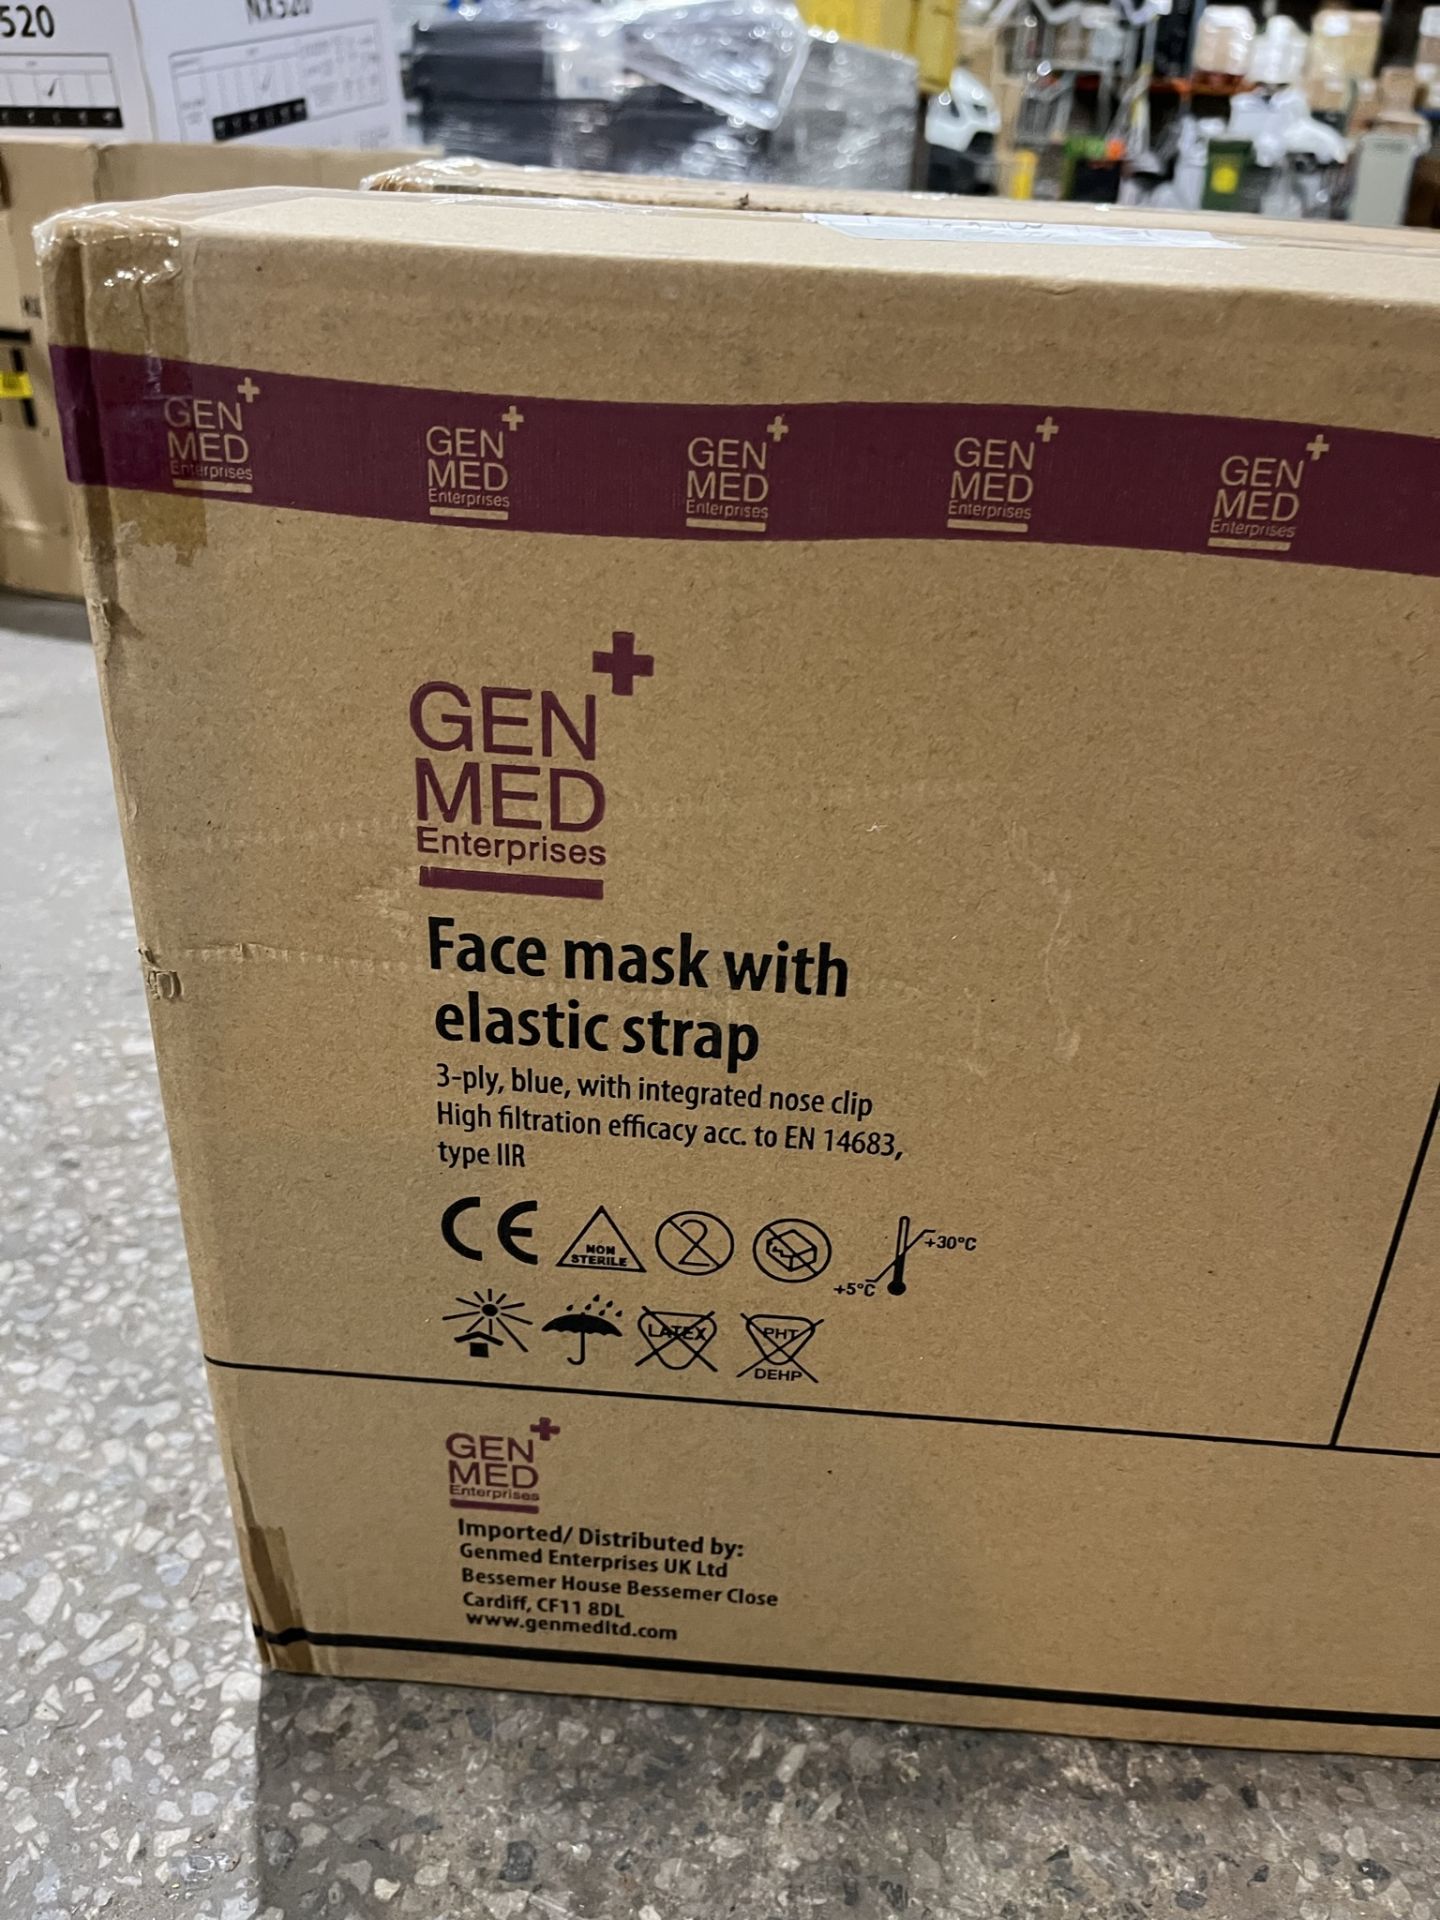 2000 x Genmed Face Masks With Elastic Strap - Image 2 of 5